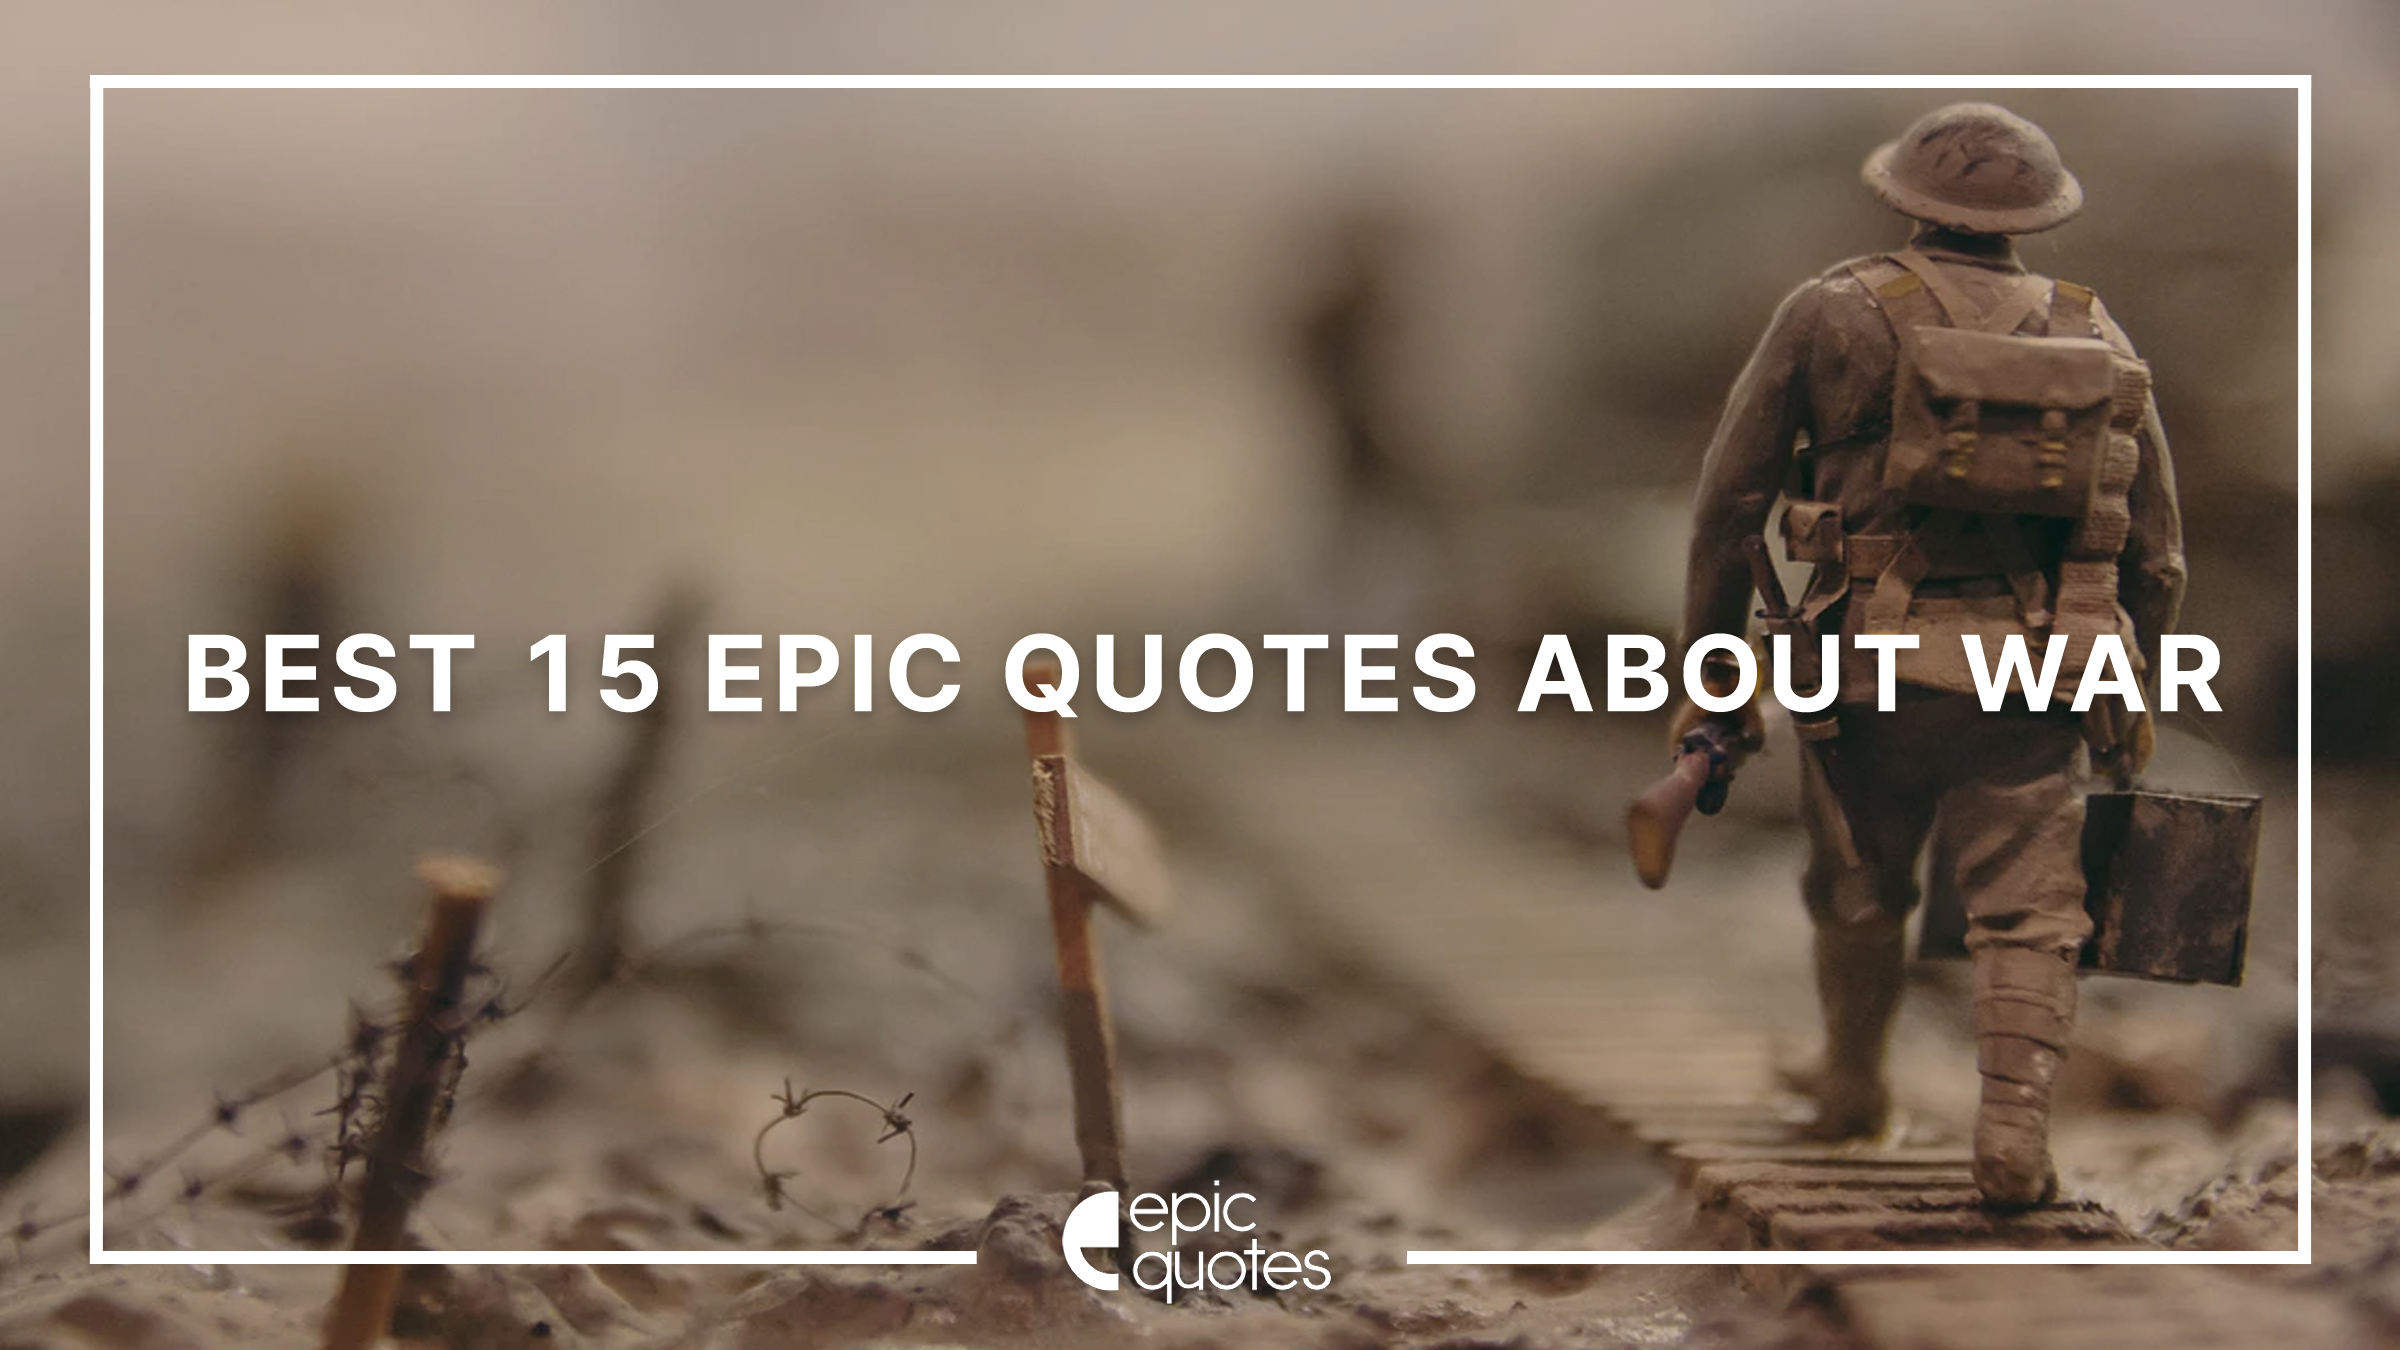 Best 15 Epic Quotes About War | Epic Quotes